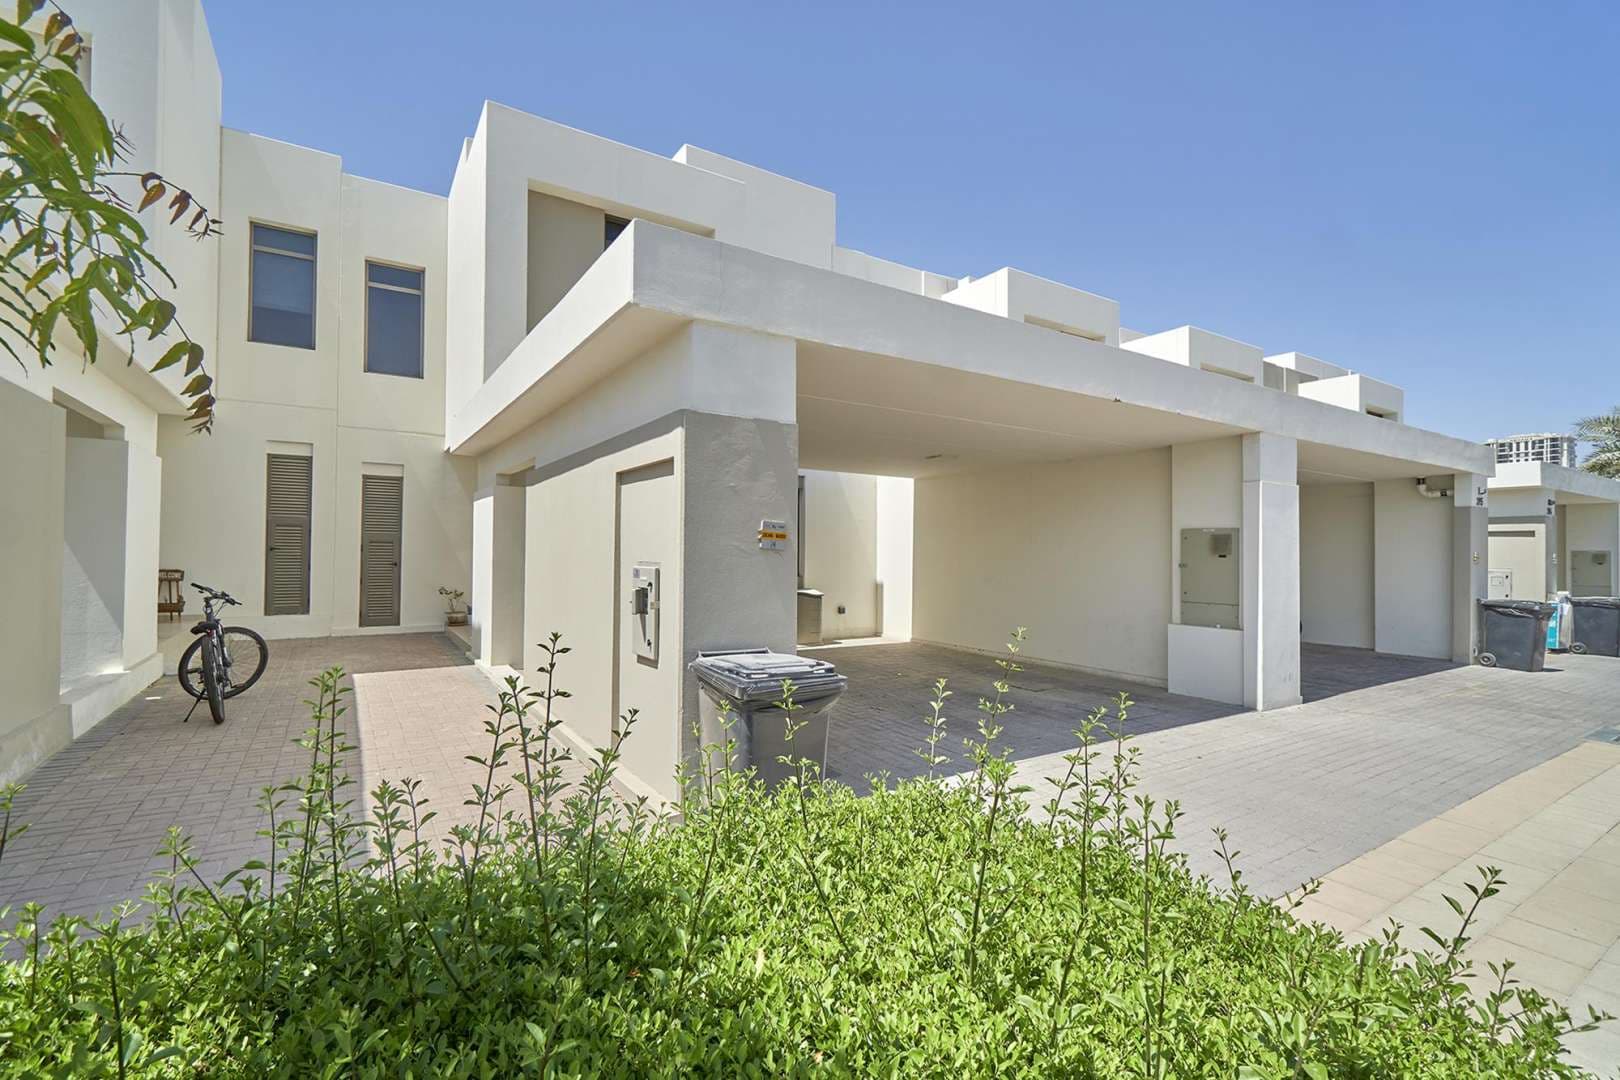 3 Bedroom Townhouse For Sale Hayat Townhouses Lp06533 96a8056649a7780.jpg